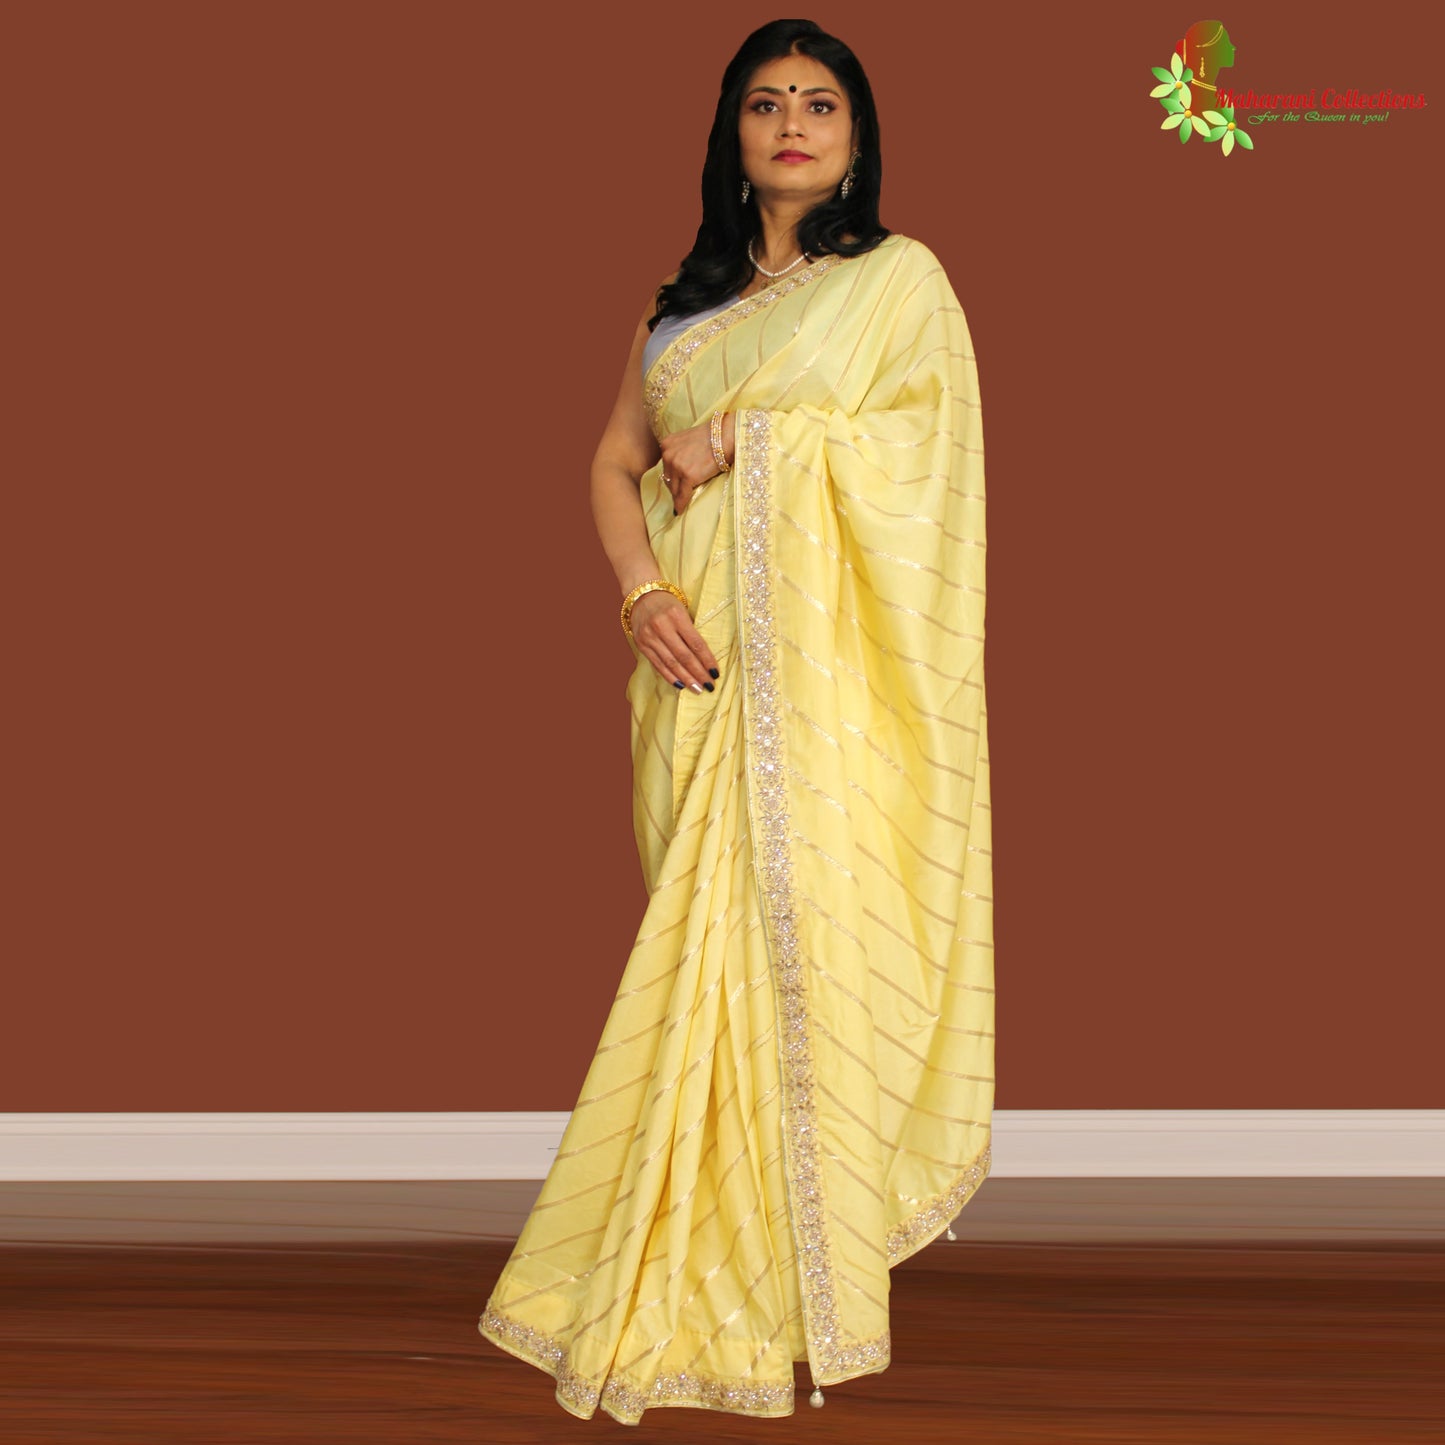 Maharani's Party Wear Georgette Lahariya Saree - Lemon Yellow (Includes Stitched Blouse and Petticoat)